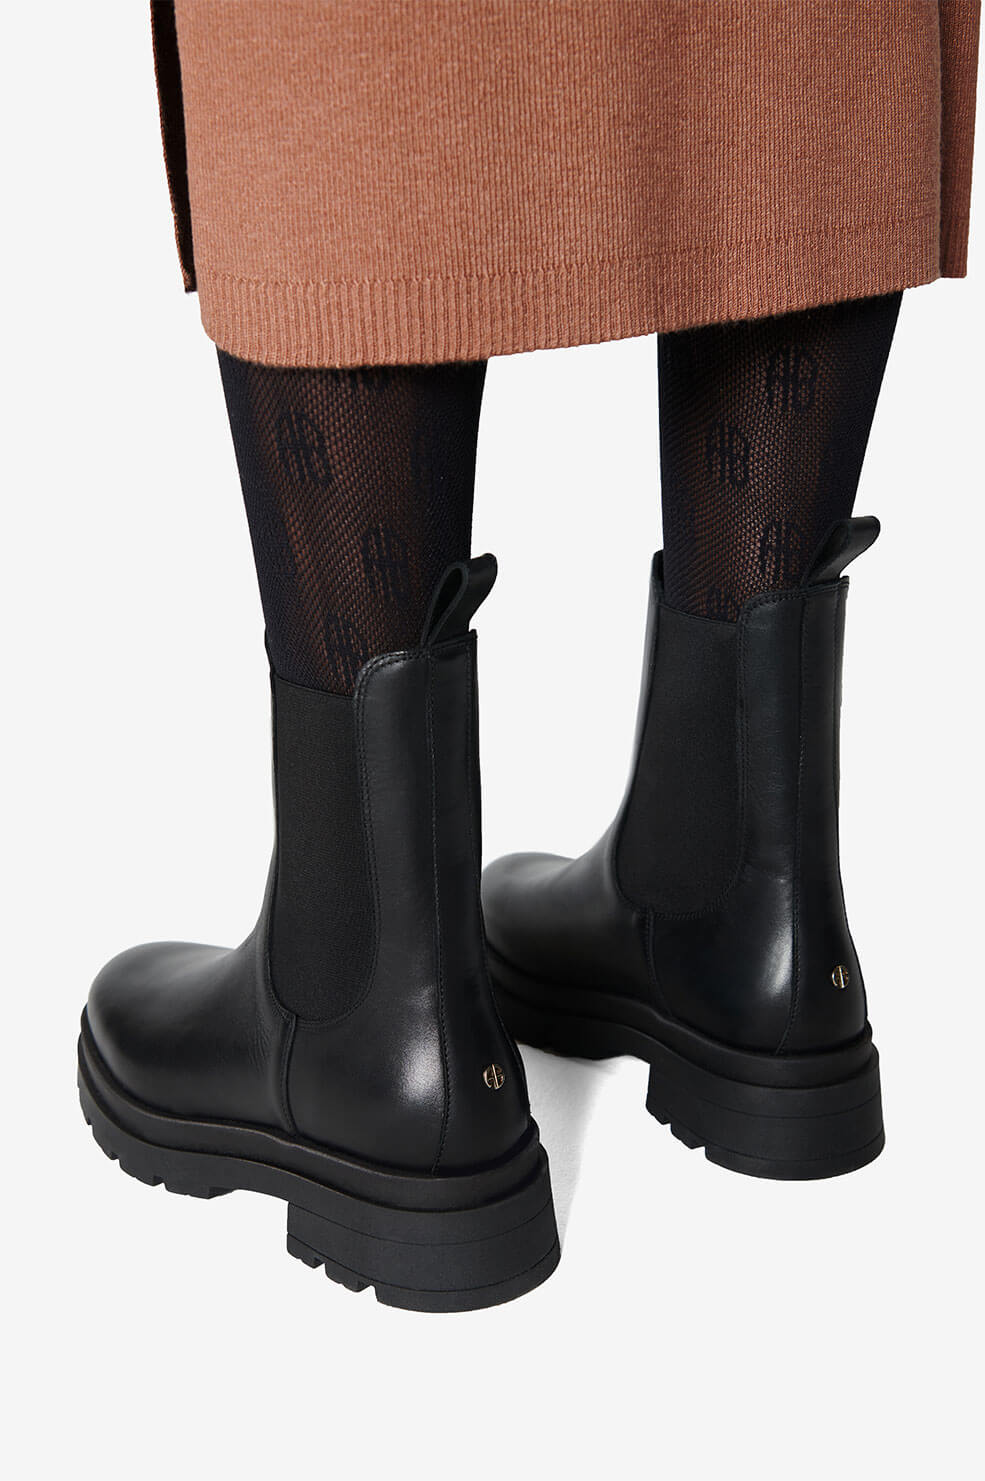 Justine Boots in Black by Anine Bing